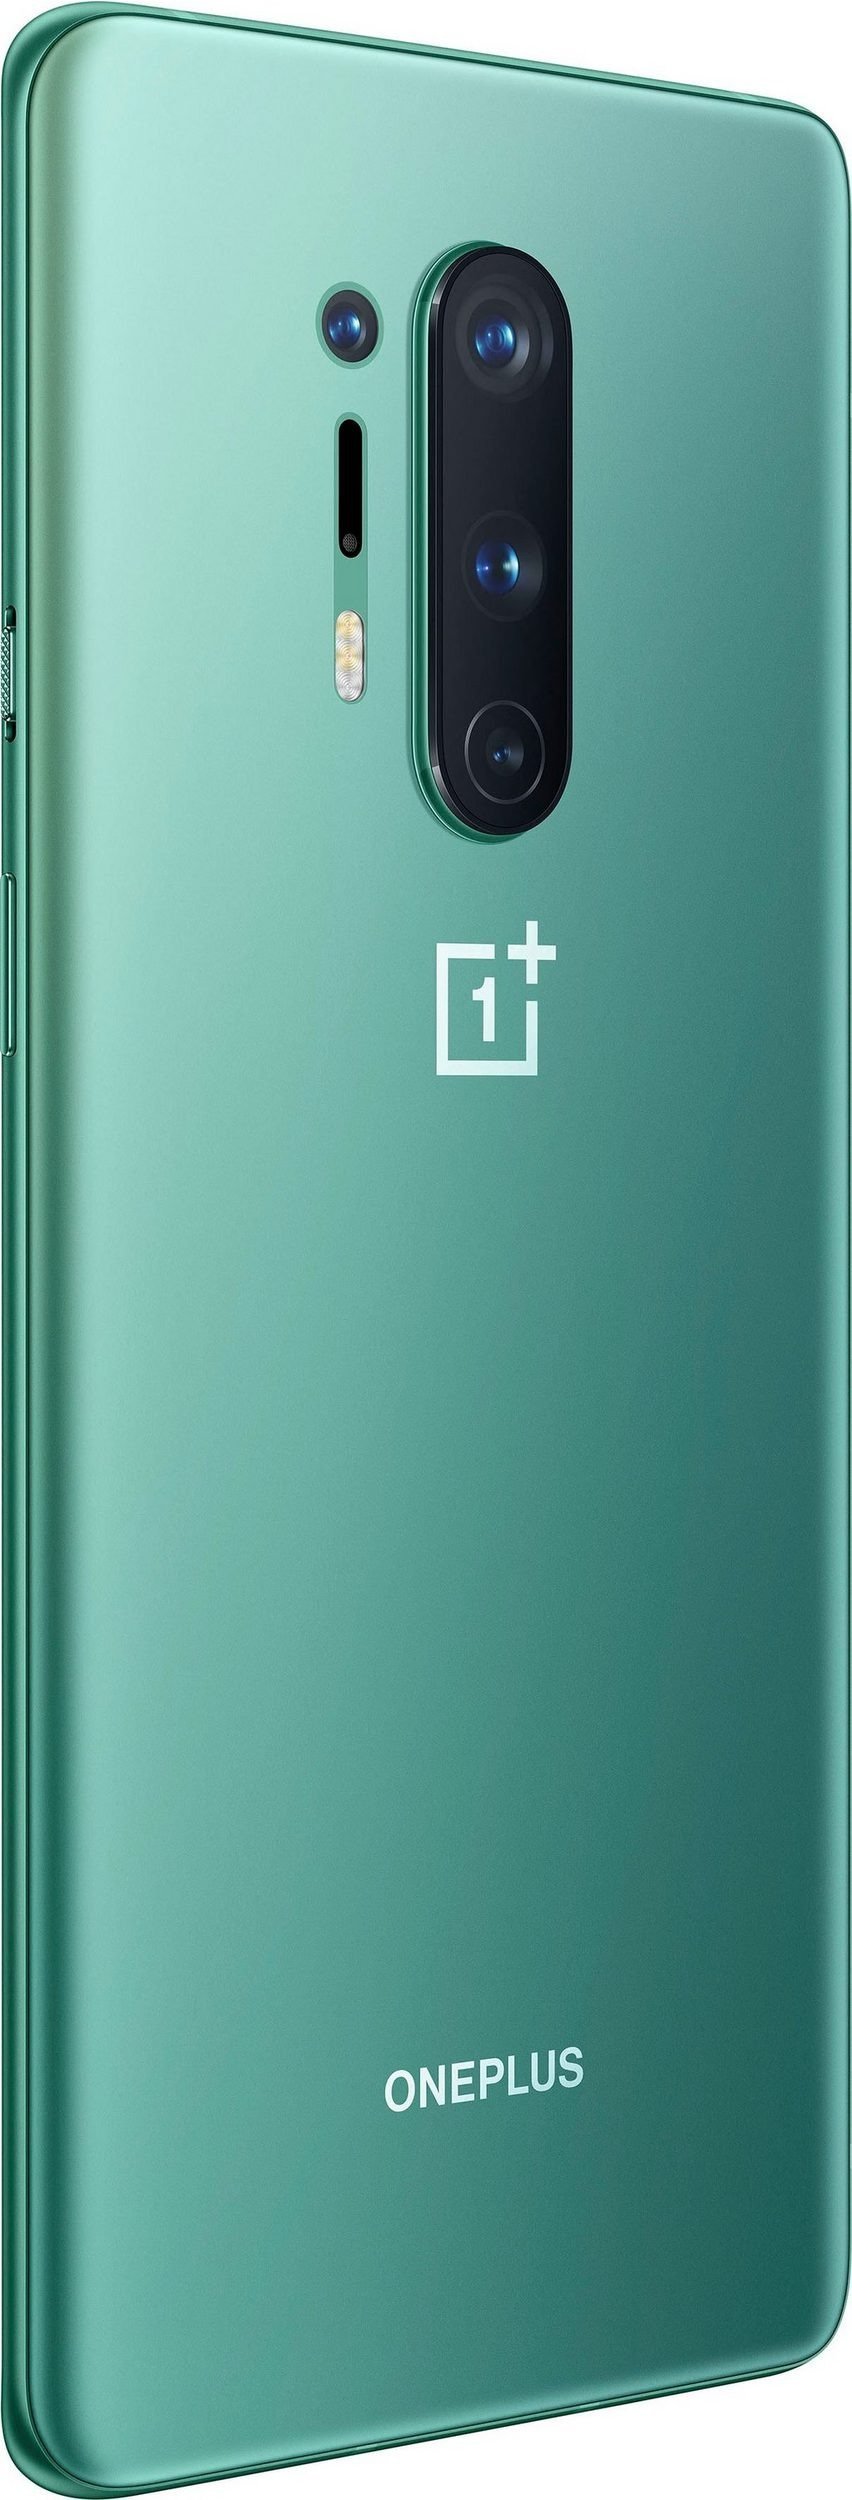 Opinions From The Oneplus 8 Pro User Reviews